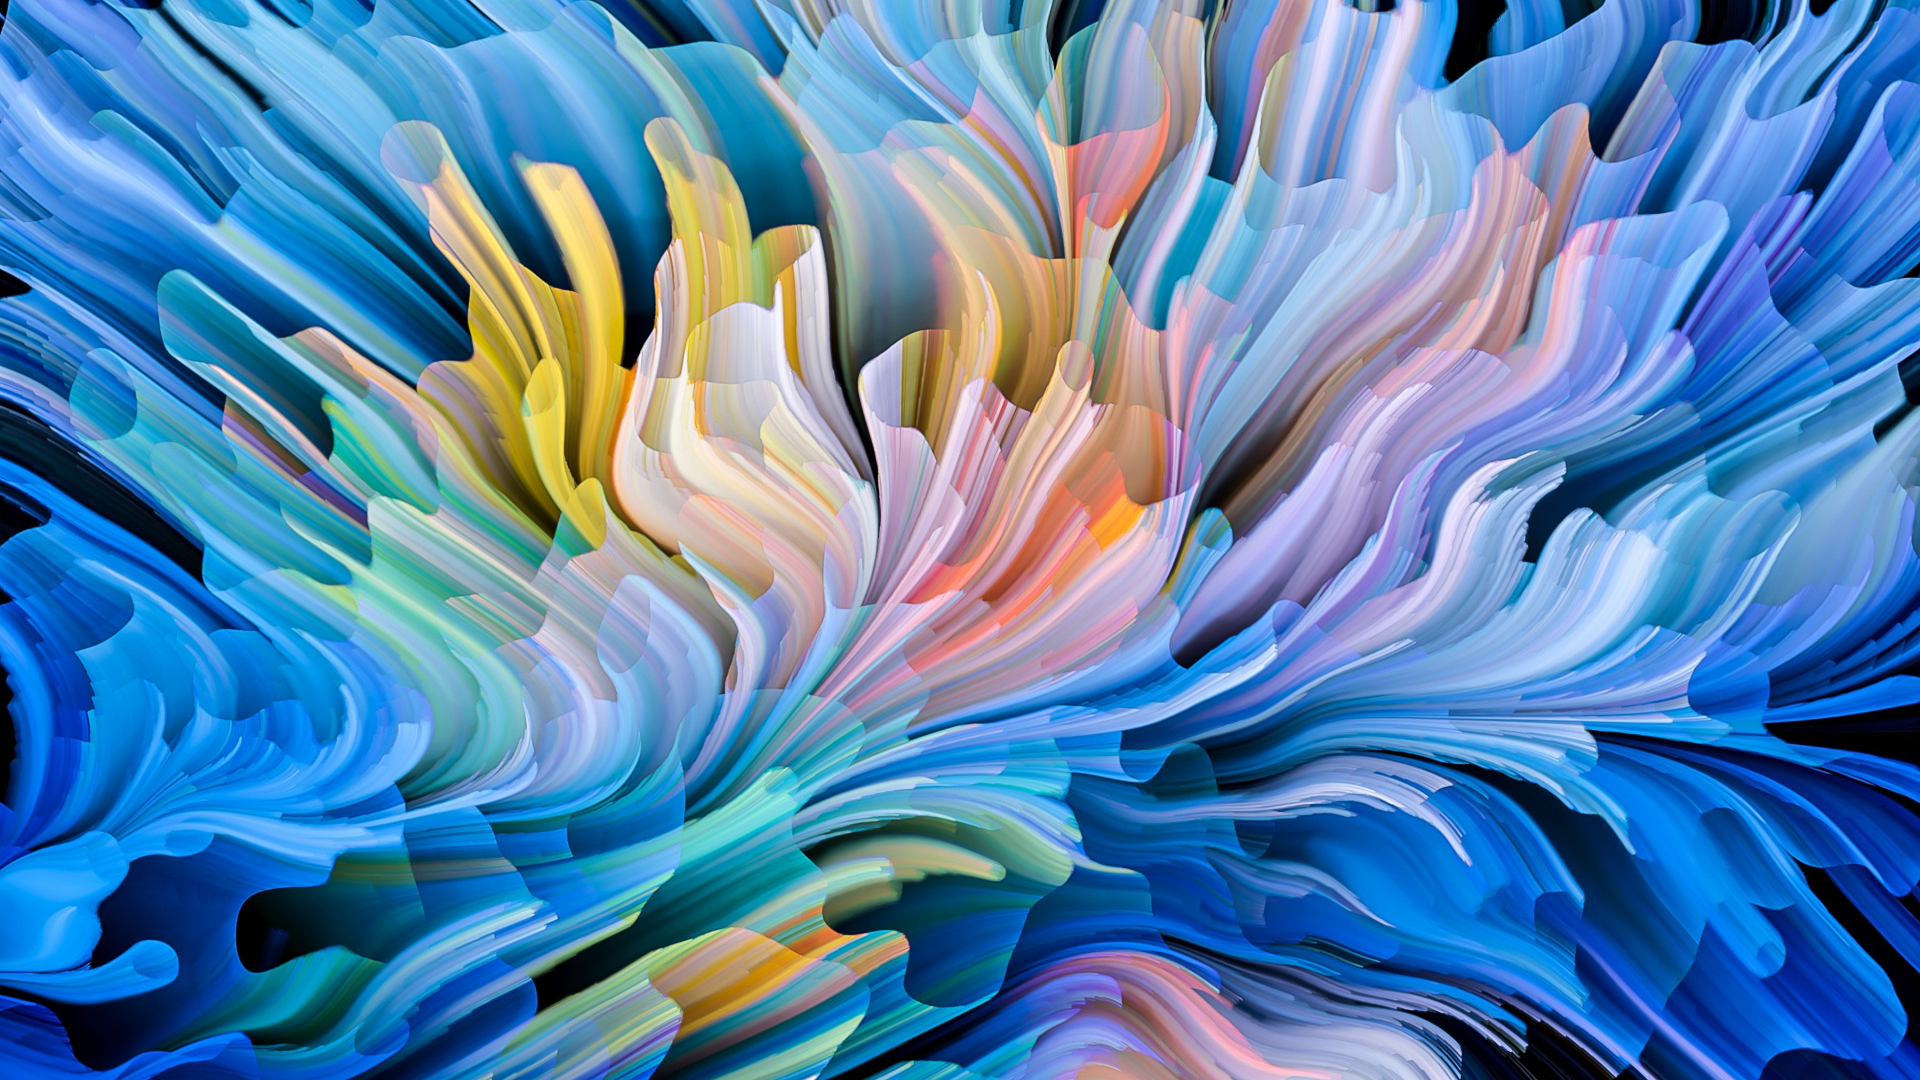 1920x1080 Colorful Curves 1080P Laptop Full HD Wallpaper, HD Abstract